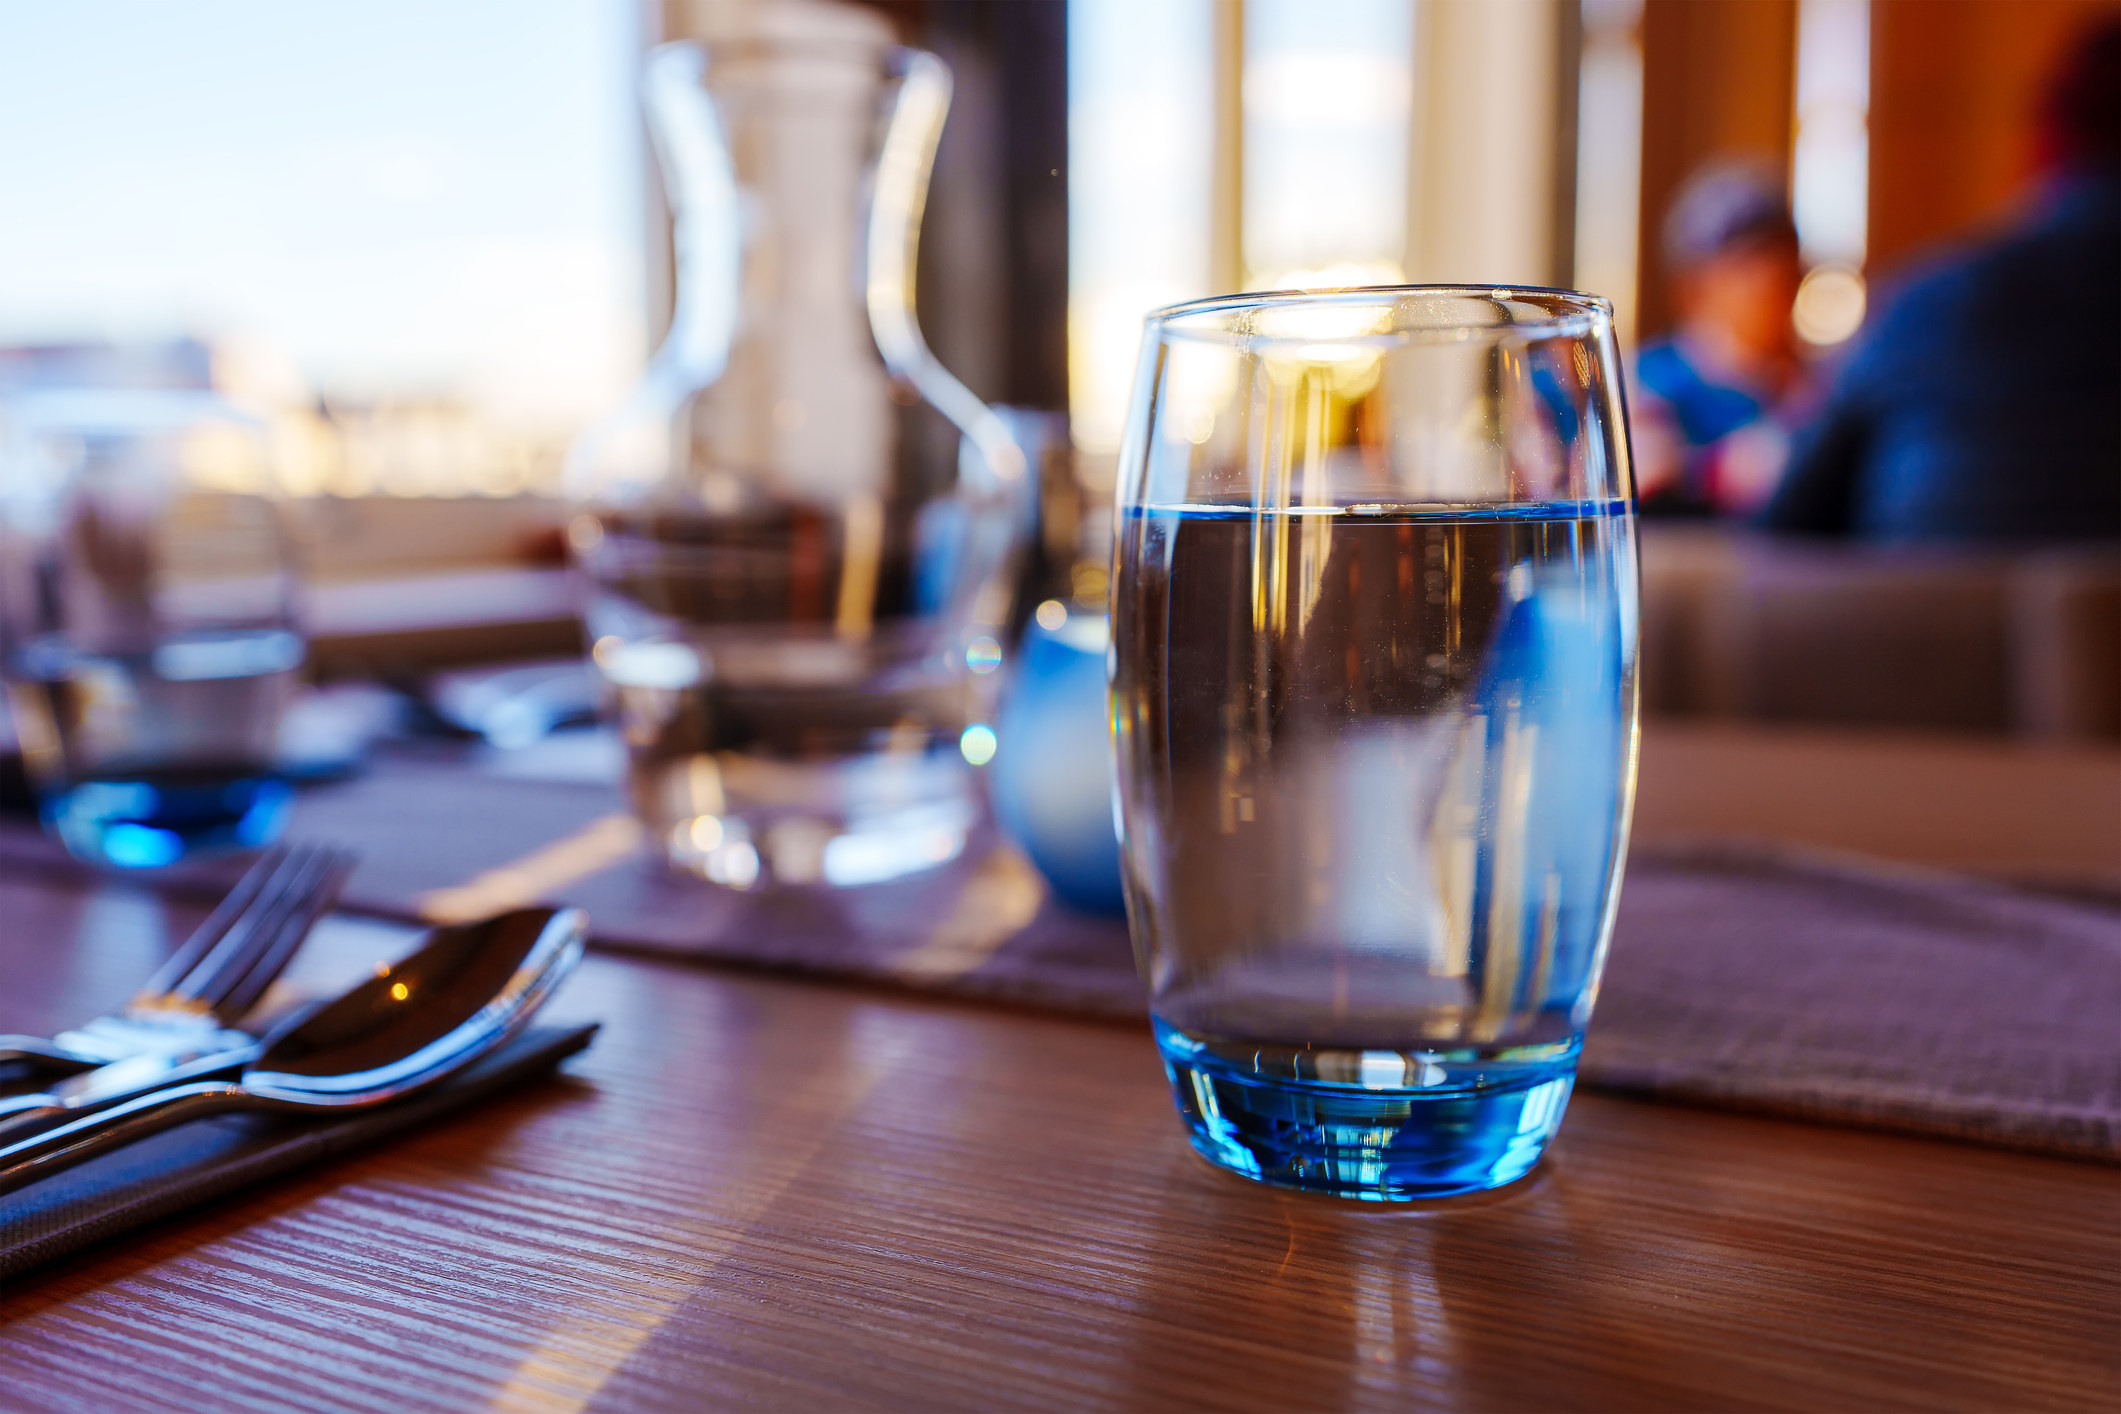 A glass of water on a table.